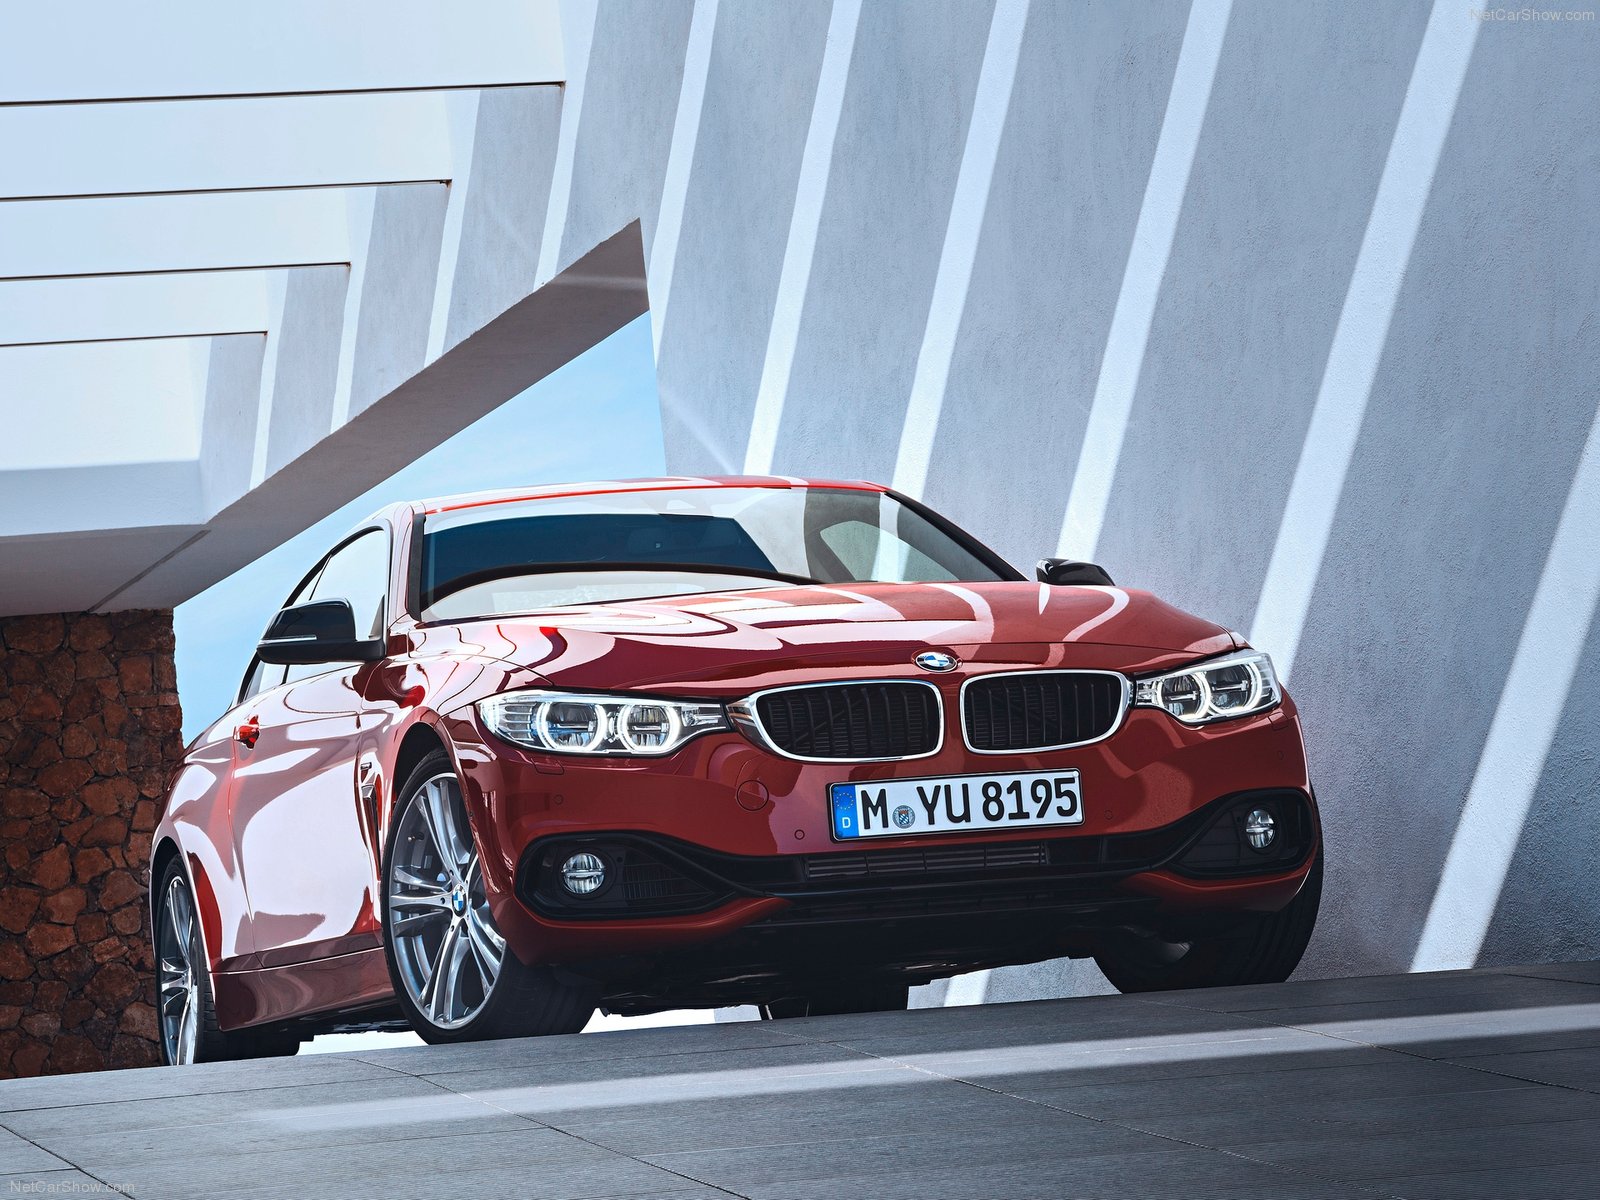 BMW 4 Series Coupe US Ordering Guide Leaked Online - autoevolution